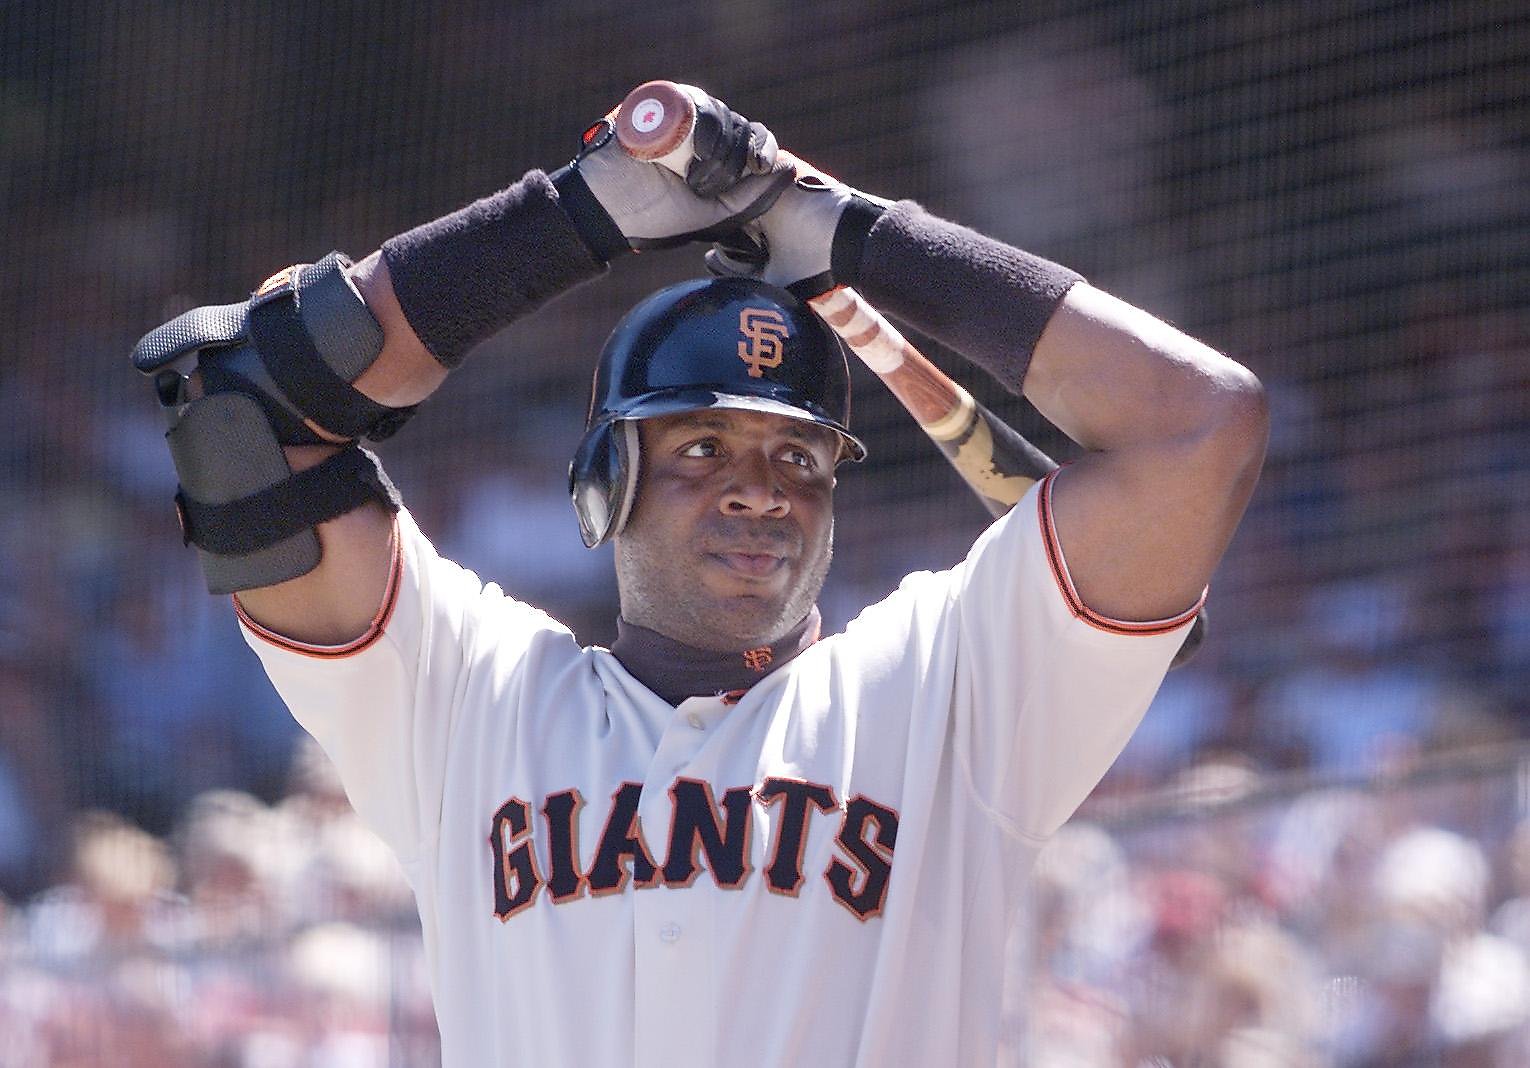 Barry Bonds resurfaces in majors as Miami Marlins hitting coach